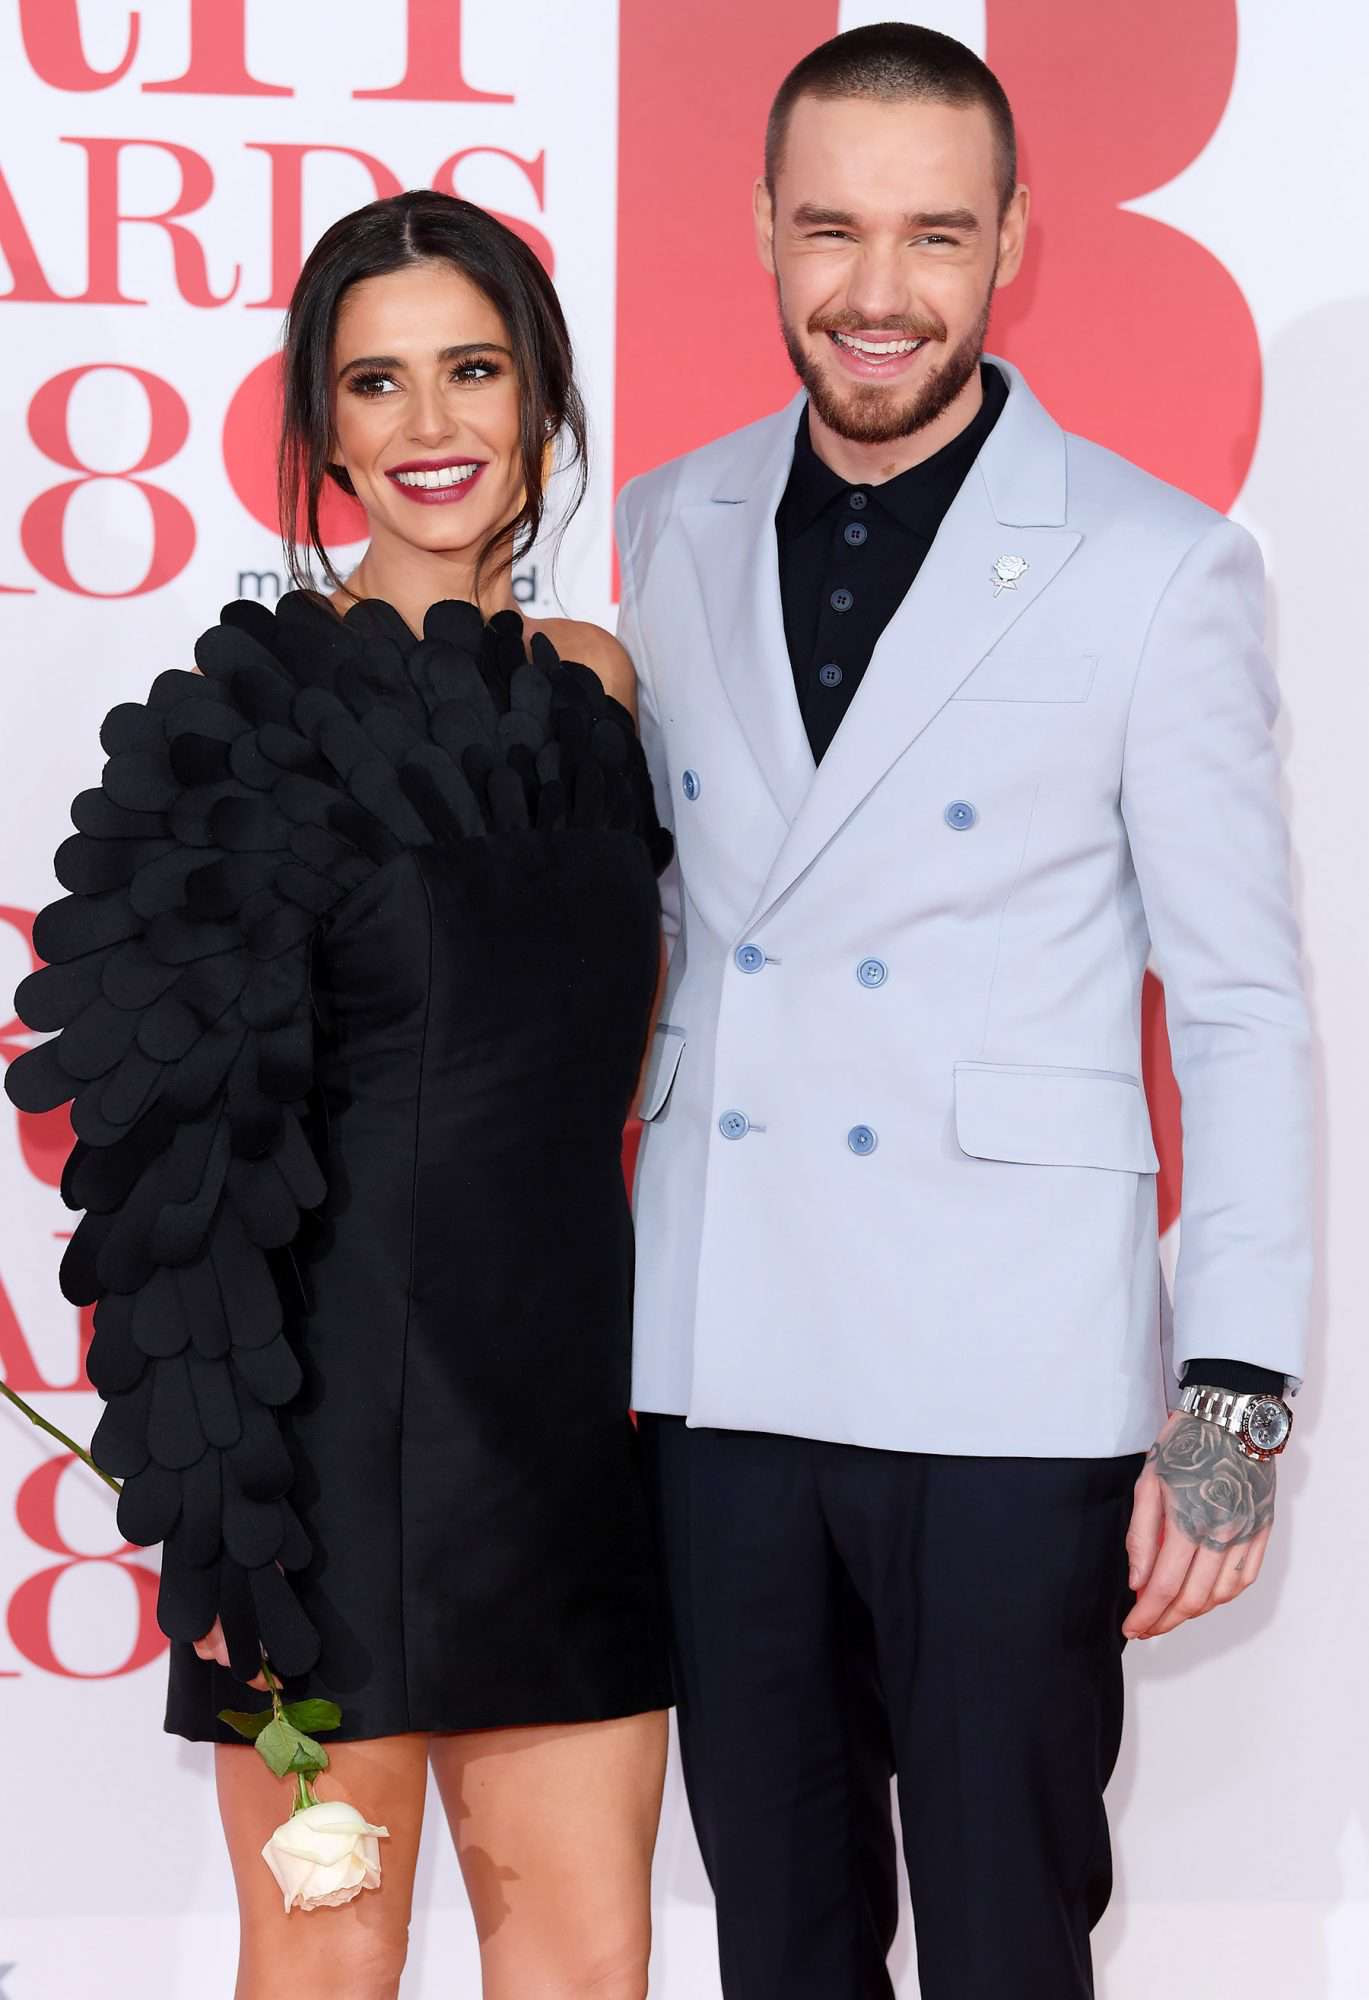 38th Brit Awards, Arrivals, The O2 Arena, London, UK - 21 Feb 2018